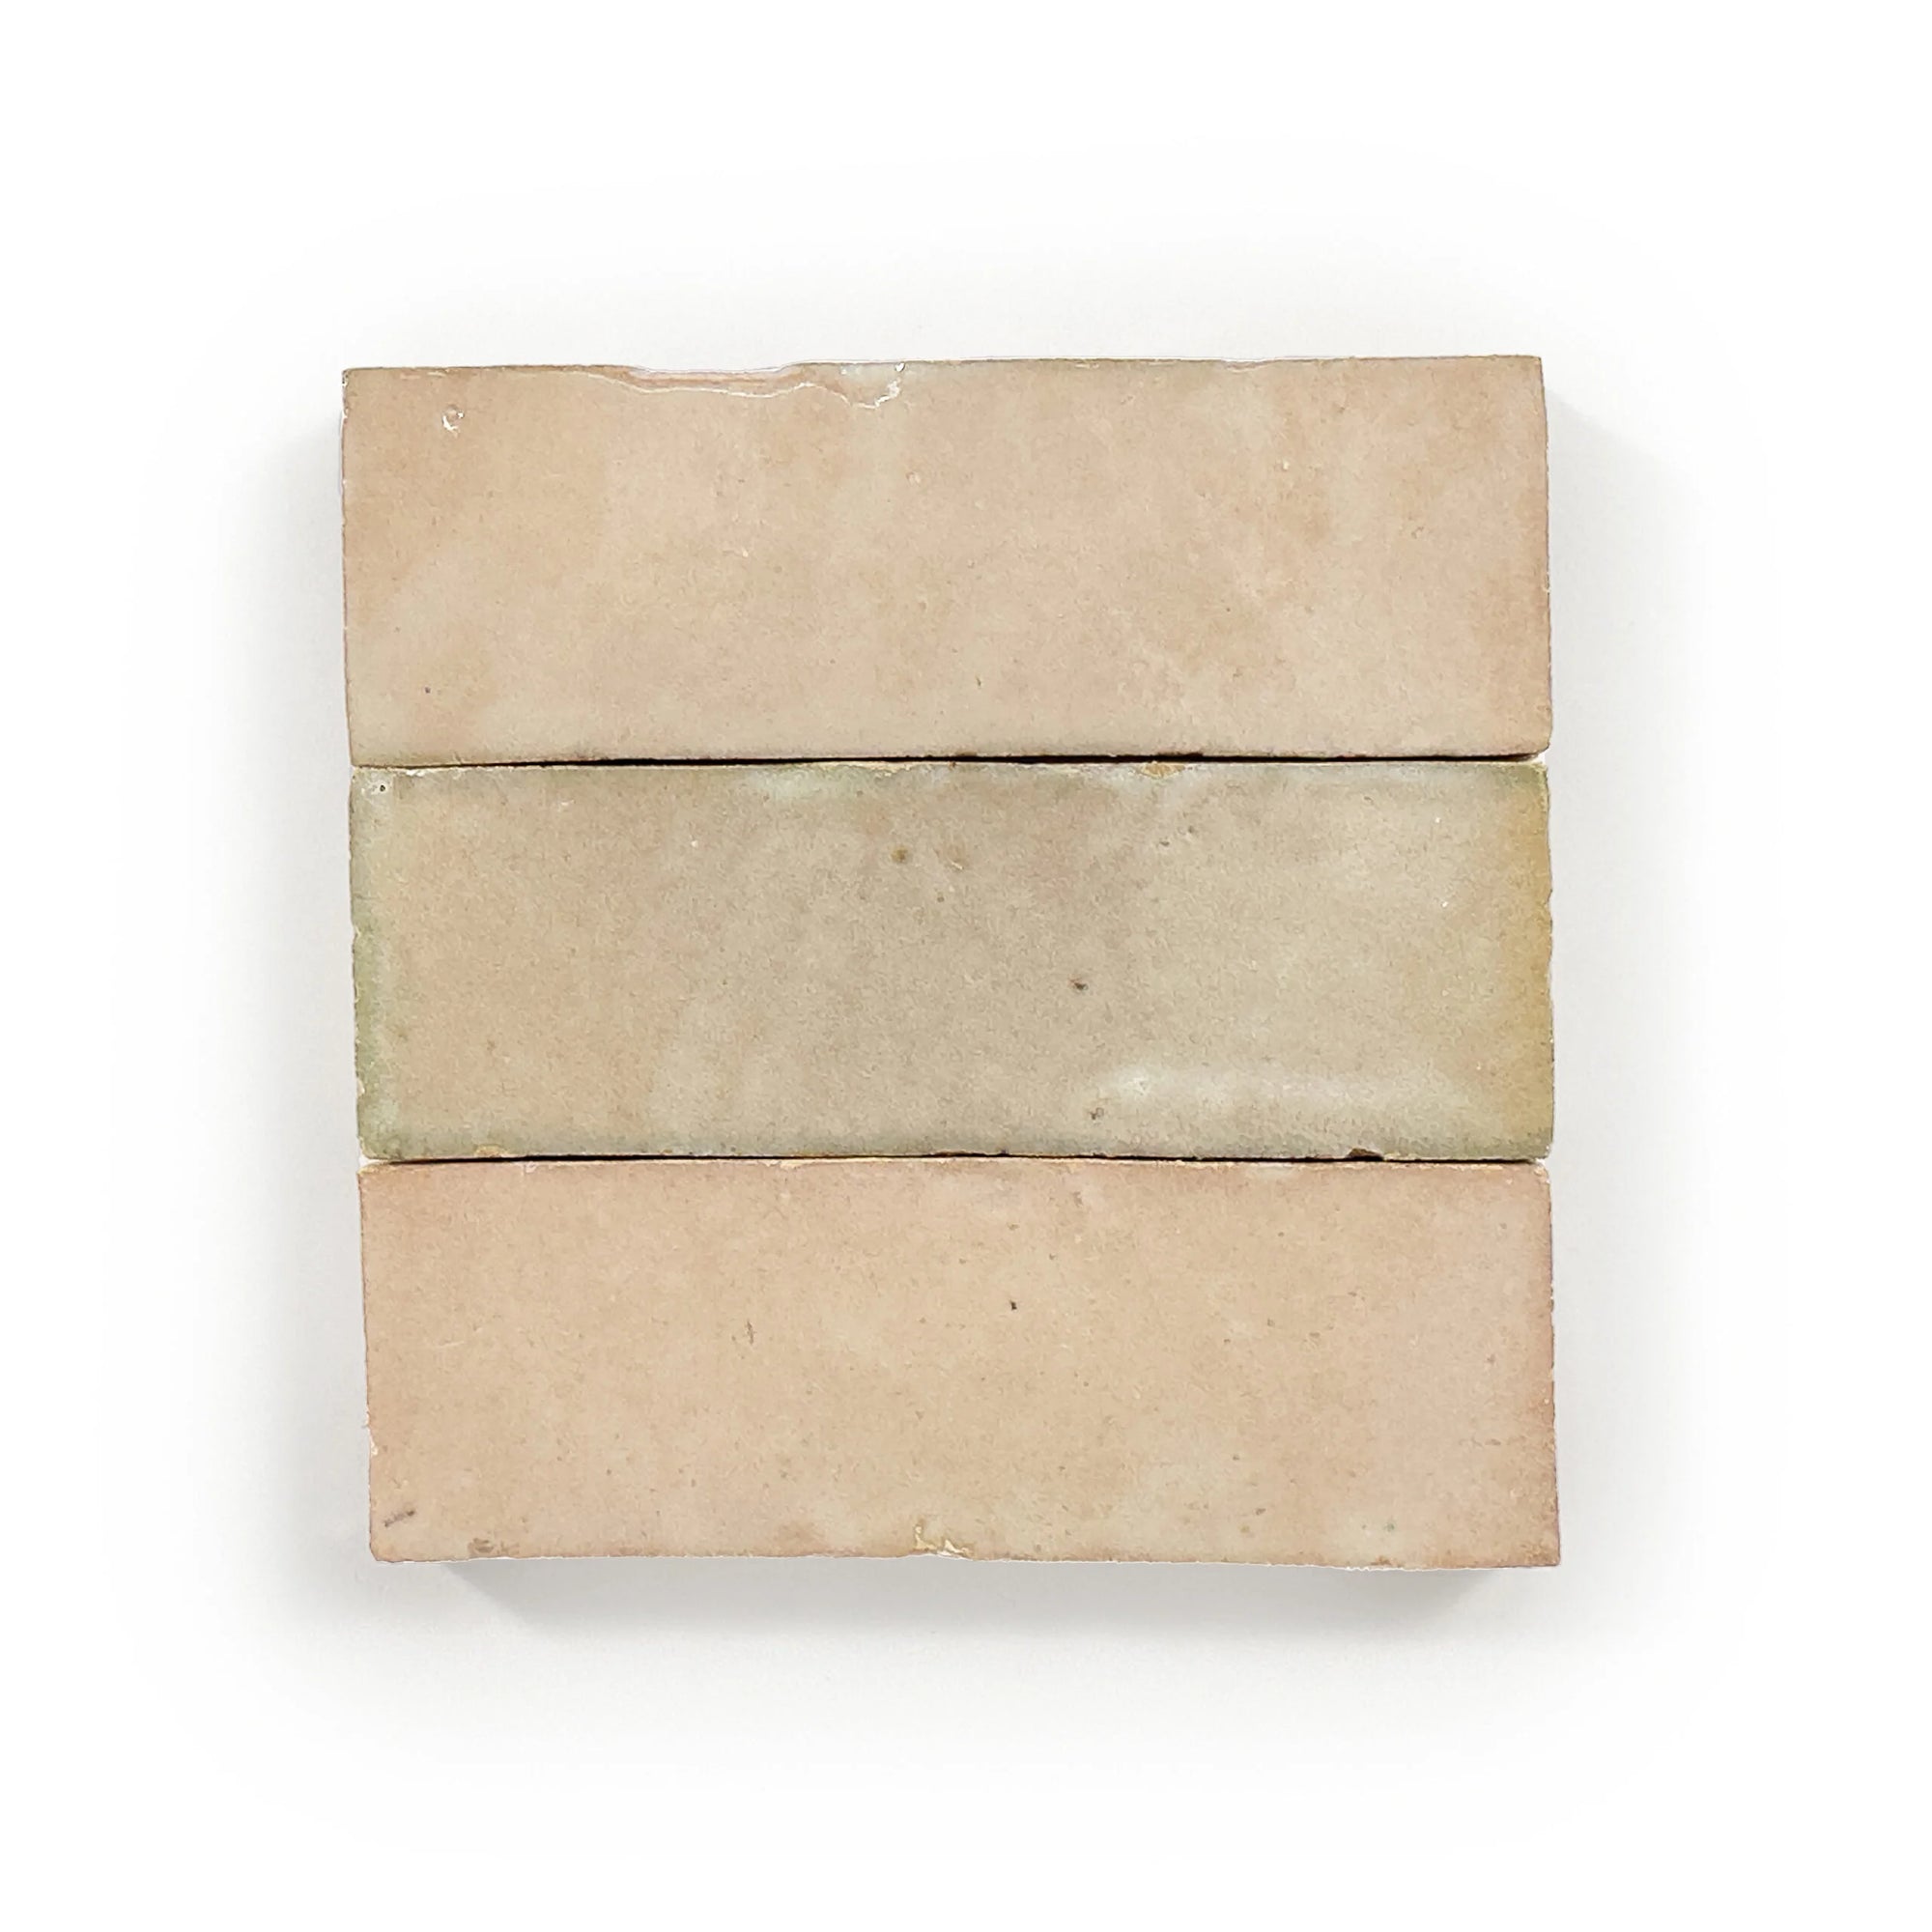 Lungarno - Zellige Classique 2 in. x 6 in. Glazed Terracotta Wall Tile - Sahara Rose